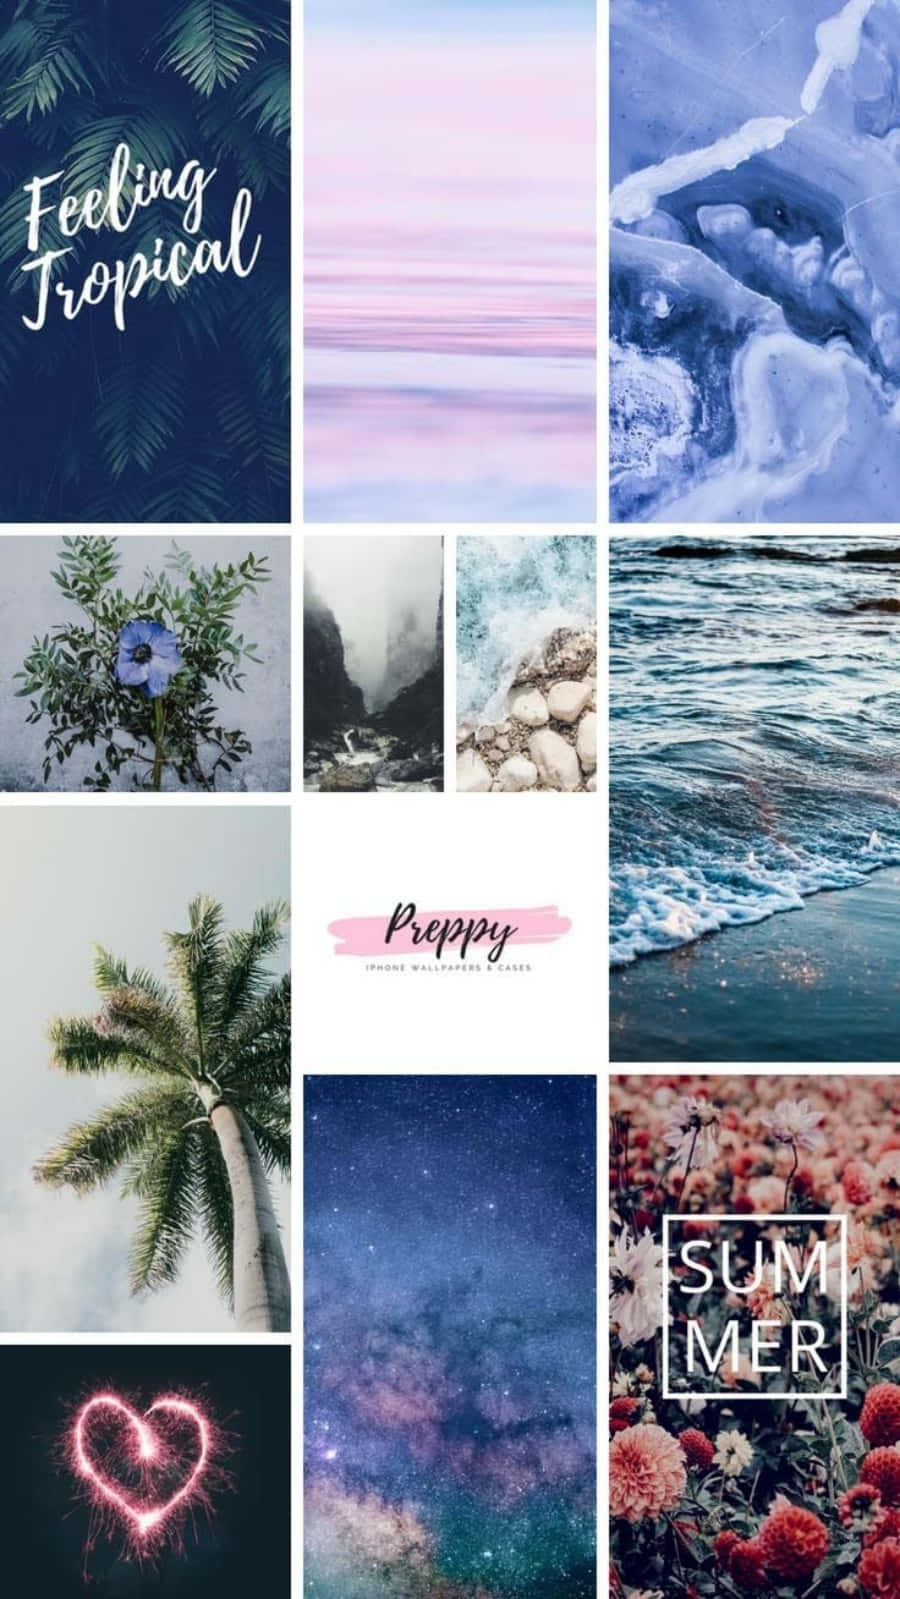 Iphone Collage Of Beach And Starry Sky Wallpaper